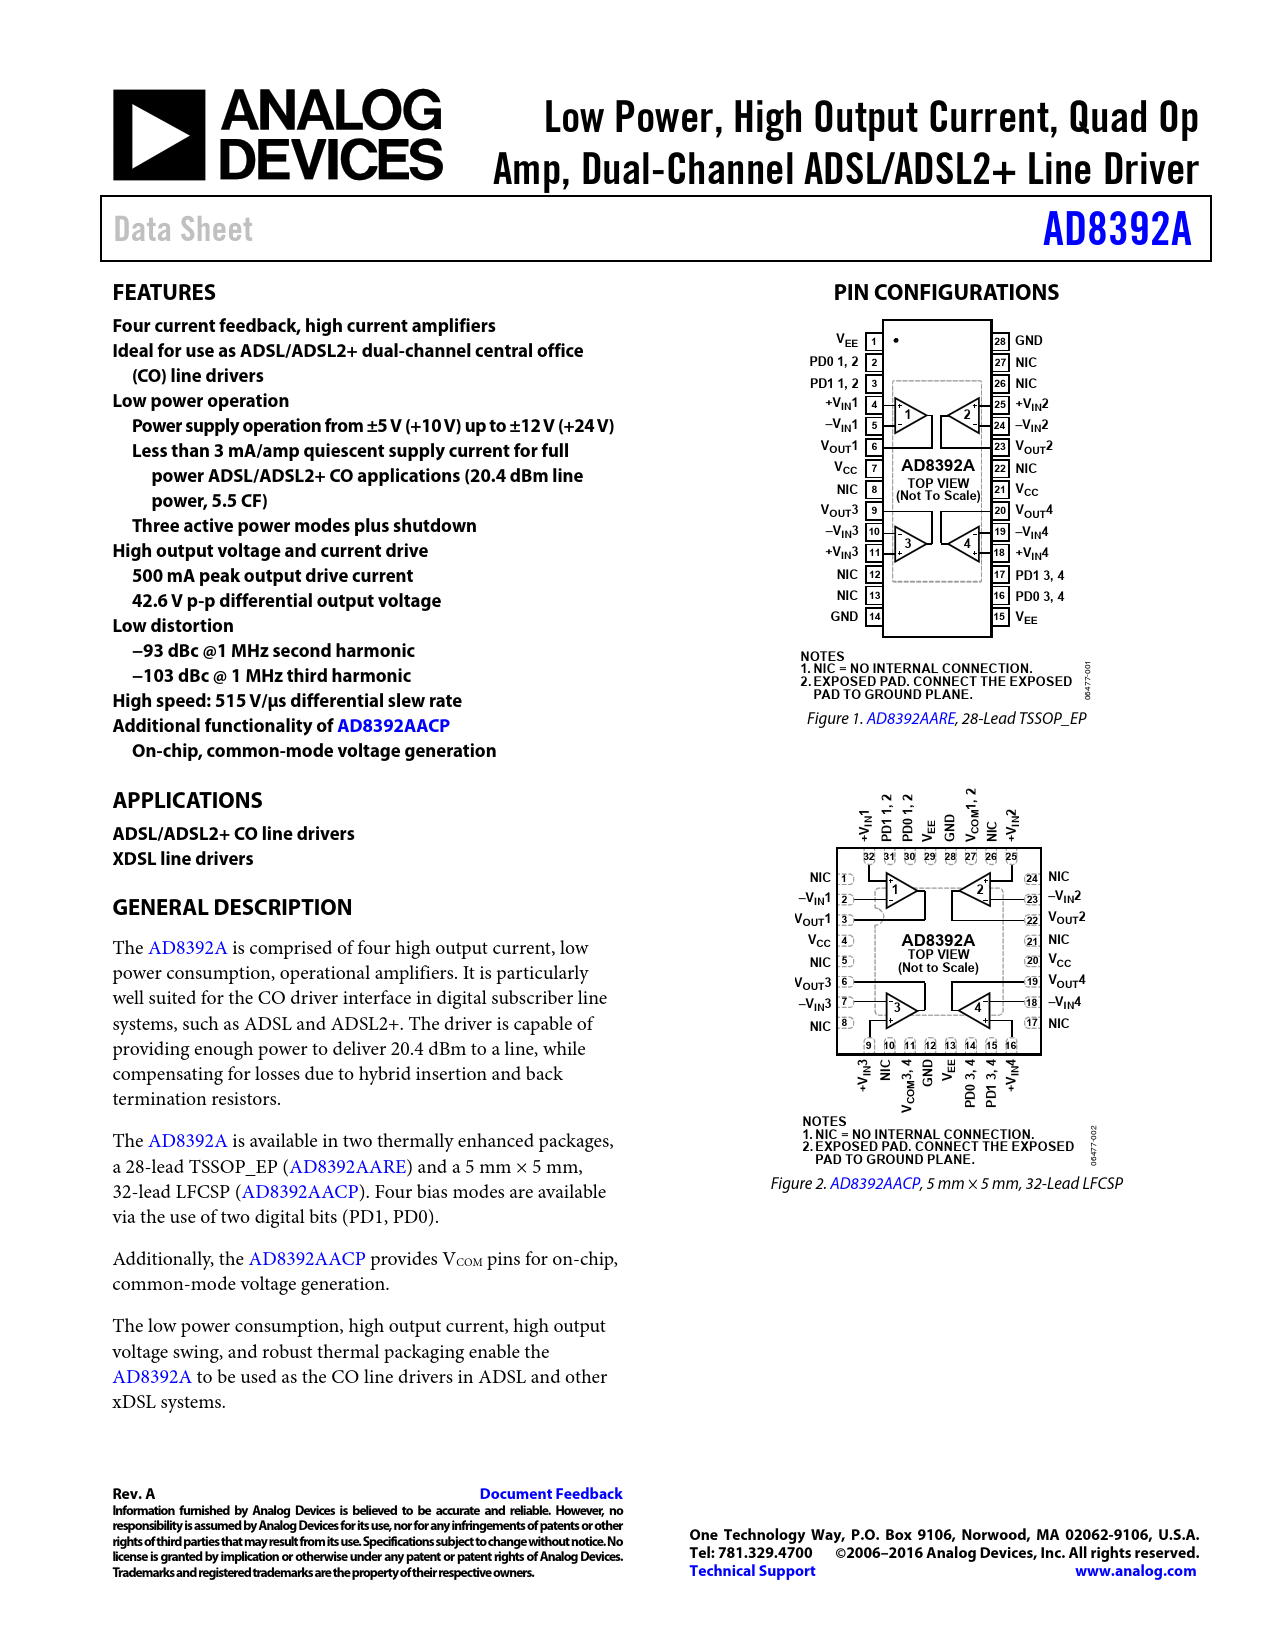 Datasheet AD8392A Analog Devices, Revision: A